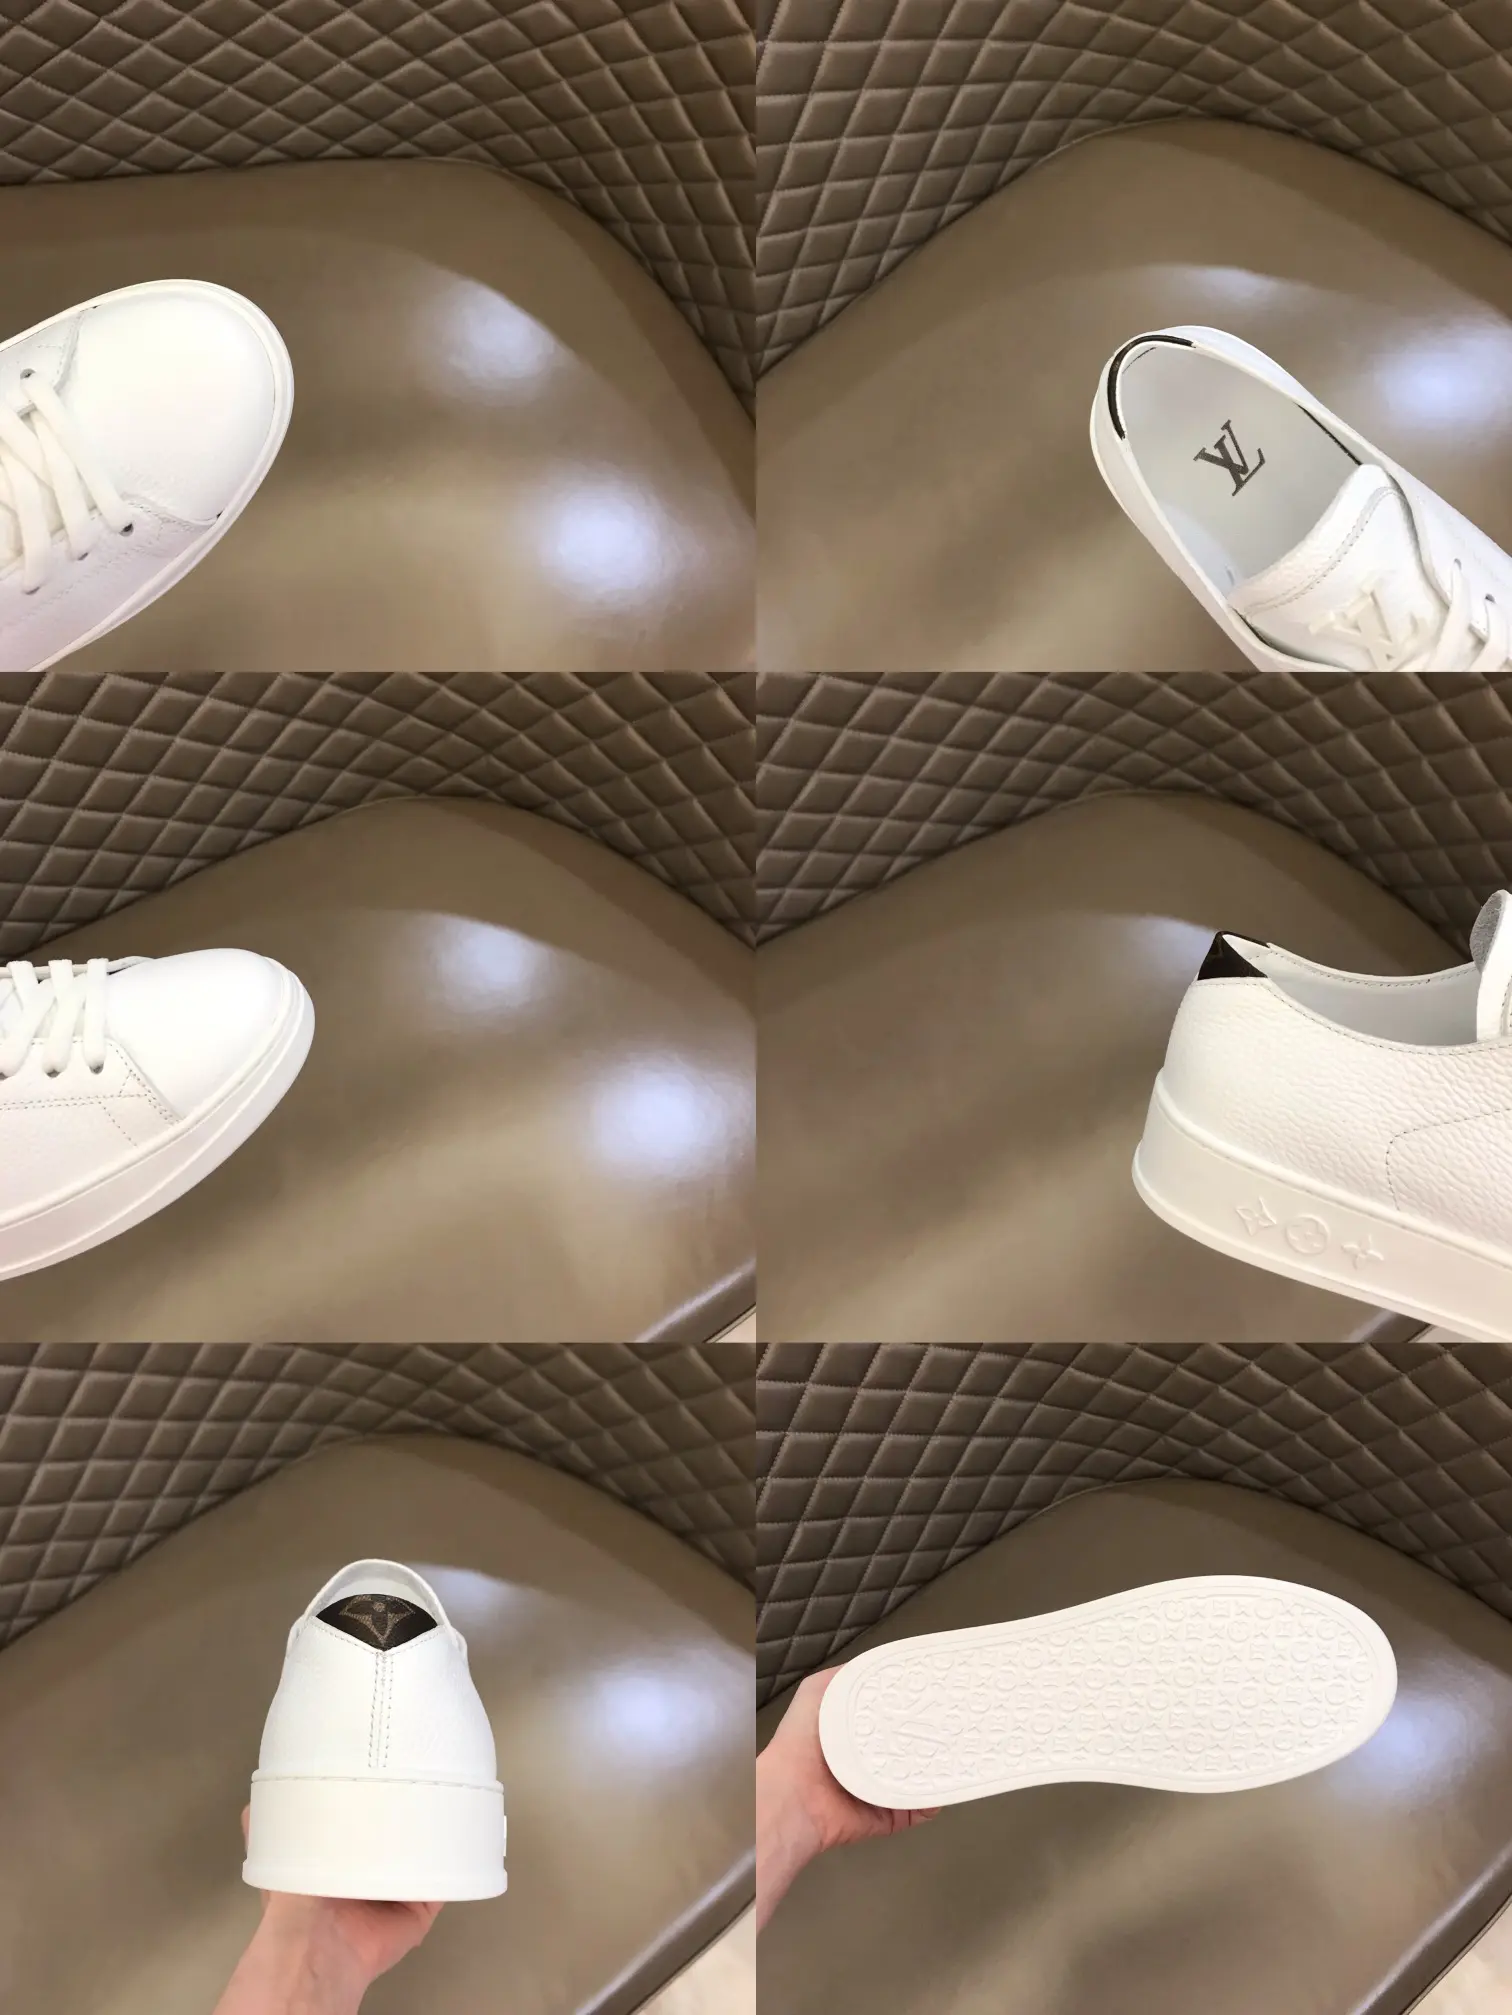 lv 2022 classic casual sneakers 